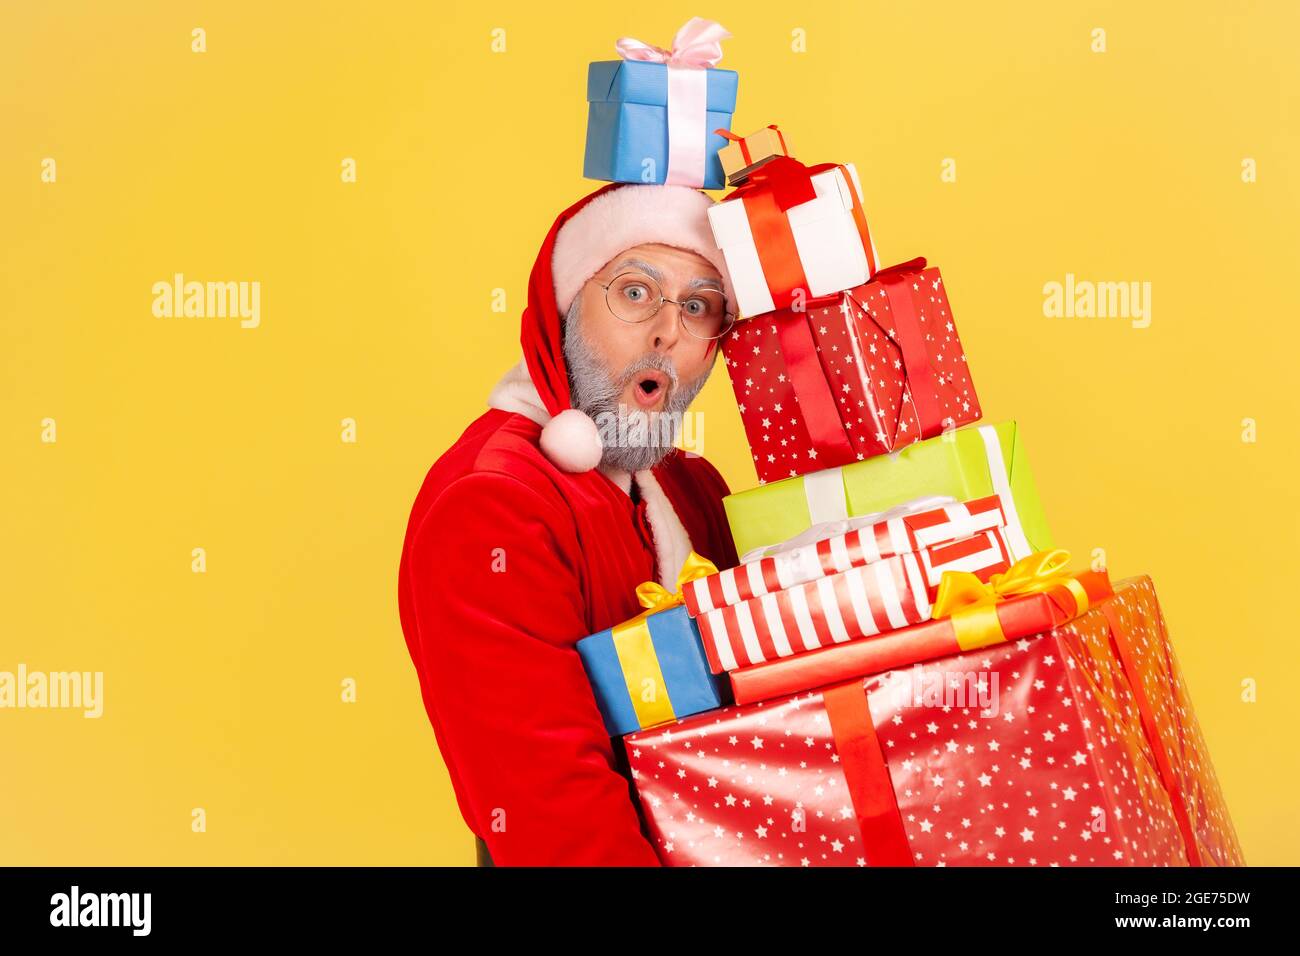 Shocked elderly man with beard in santa claus costume standing with many Christmas gifts, looking at camera with astonished face, heavy presents box. Stock Photo